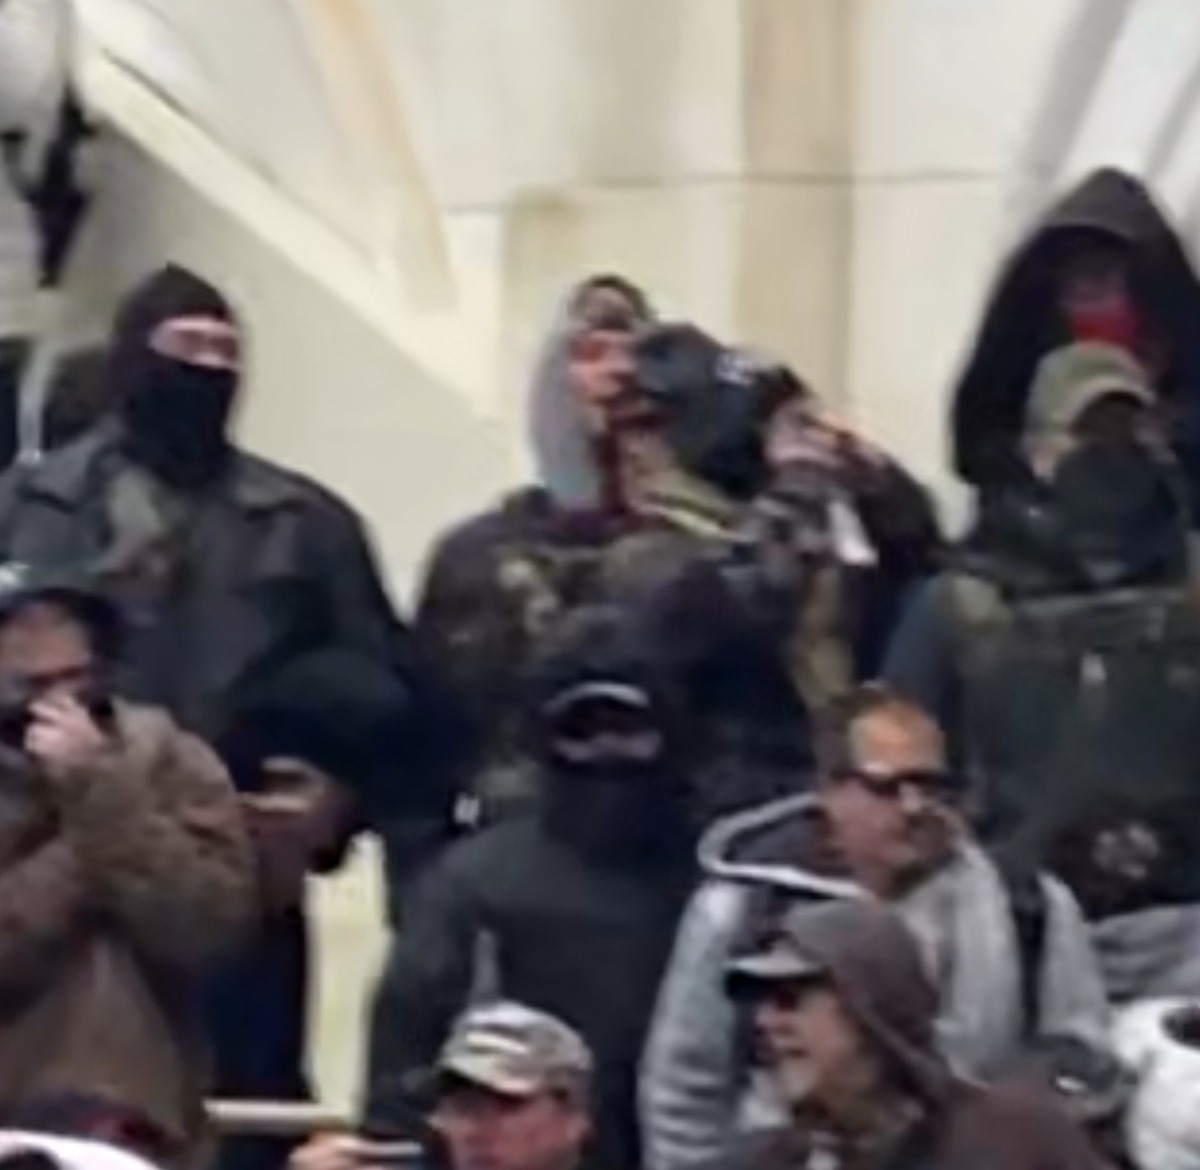 Suspicious group of what appears to be Patriot group affiliates with potential ties to the FBI or federal law enforcement observing the violence to the left of the Capitol building doors – Source: National File